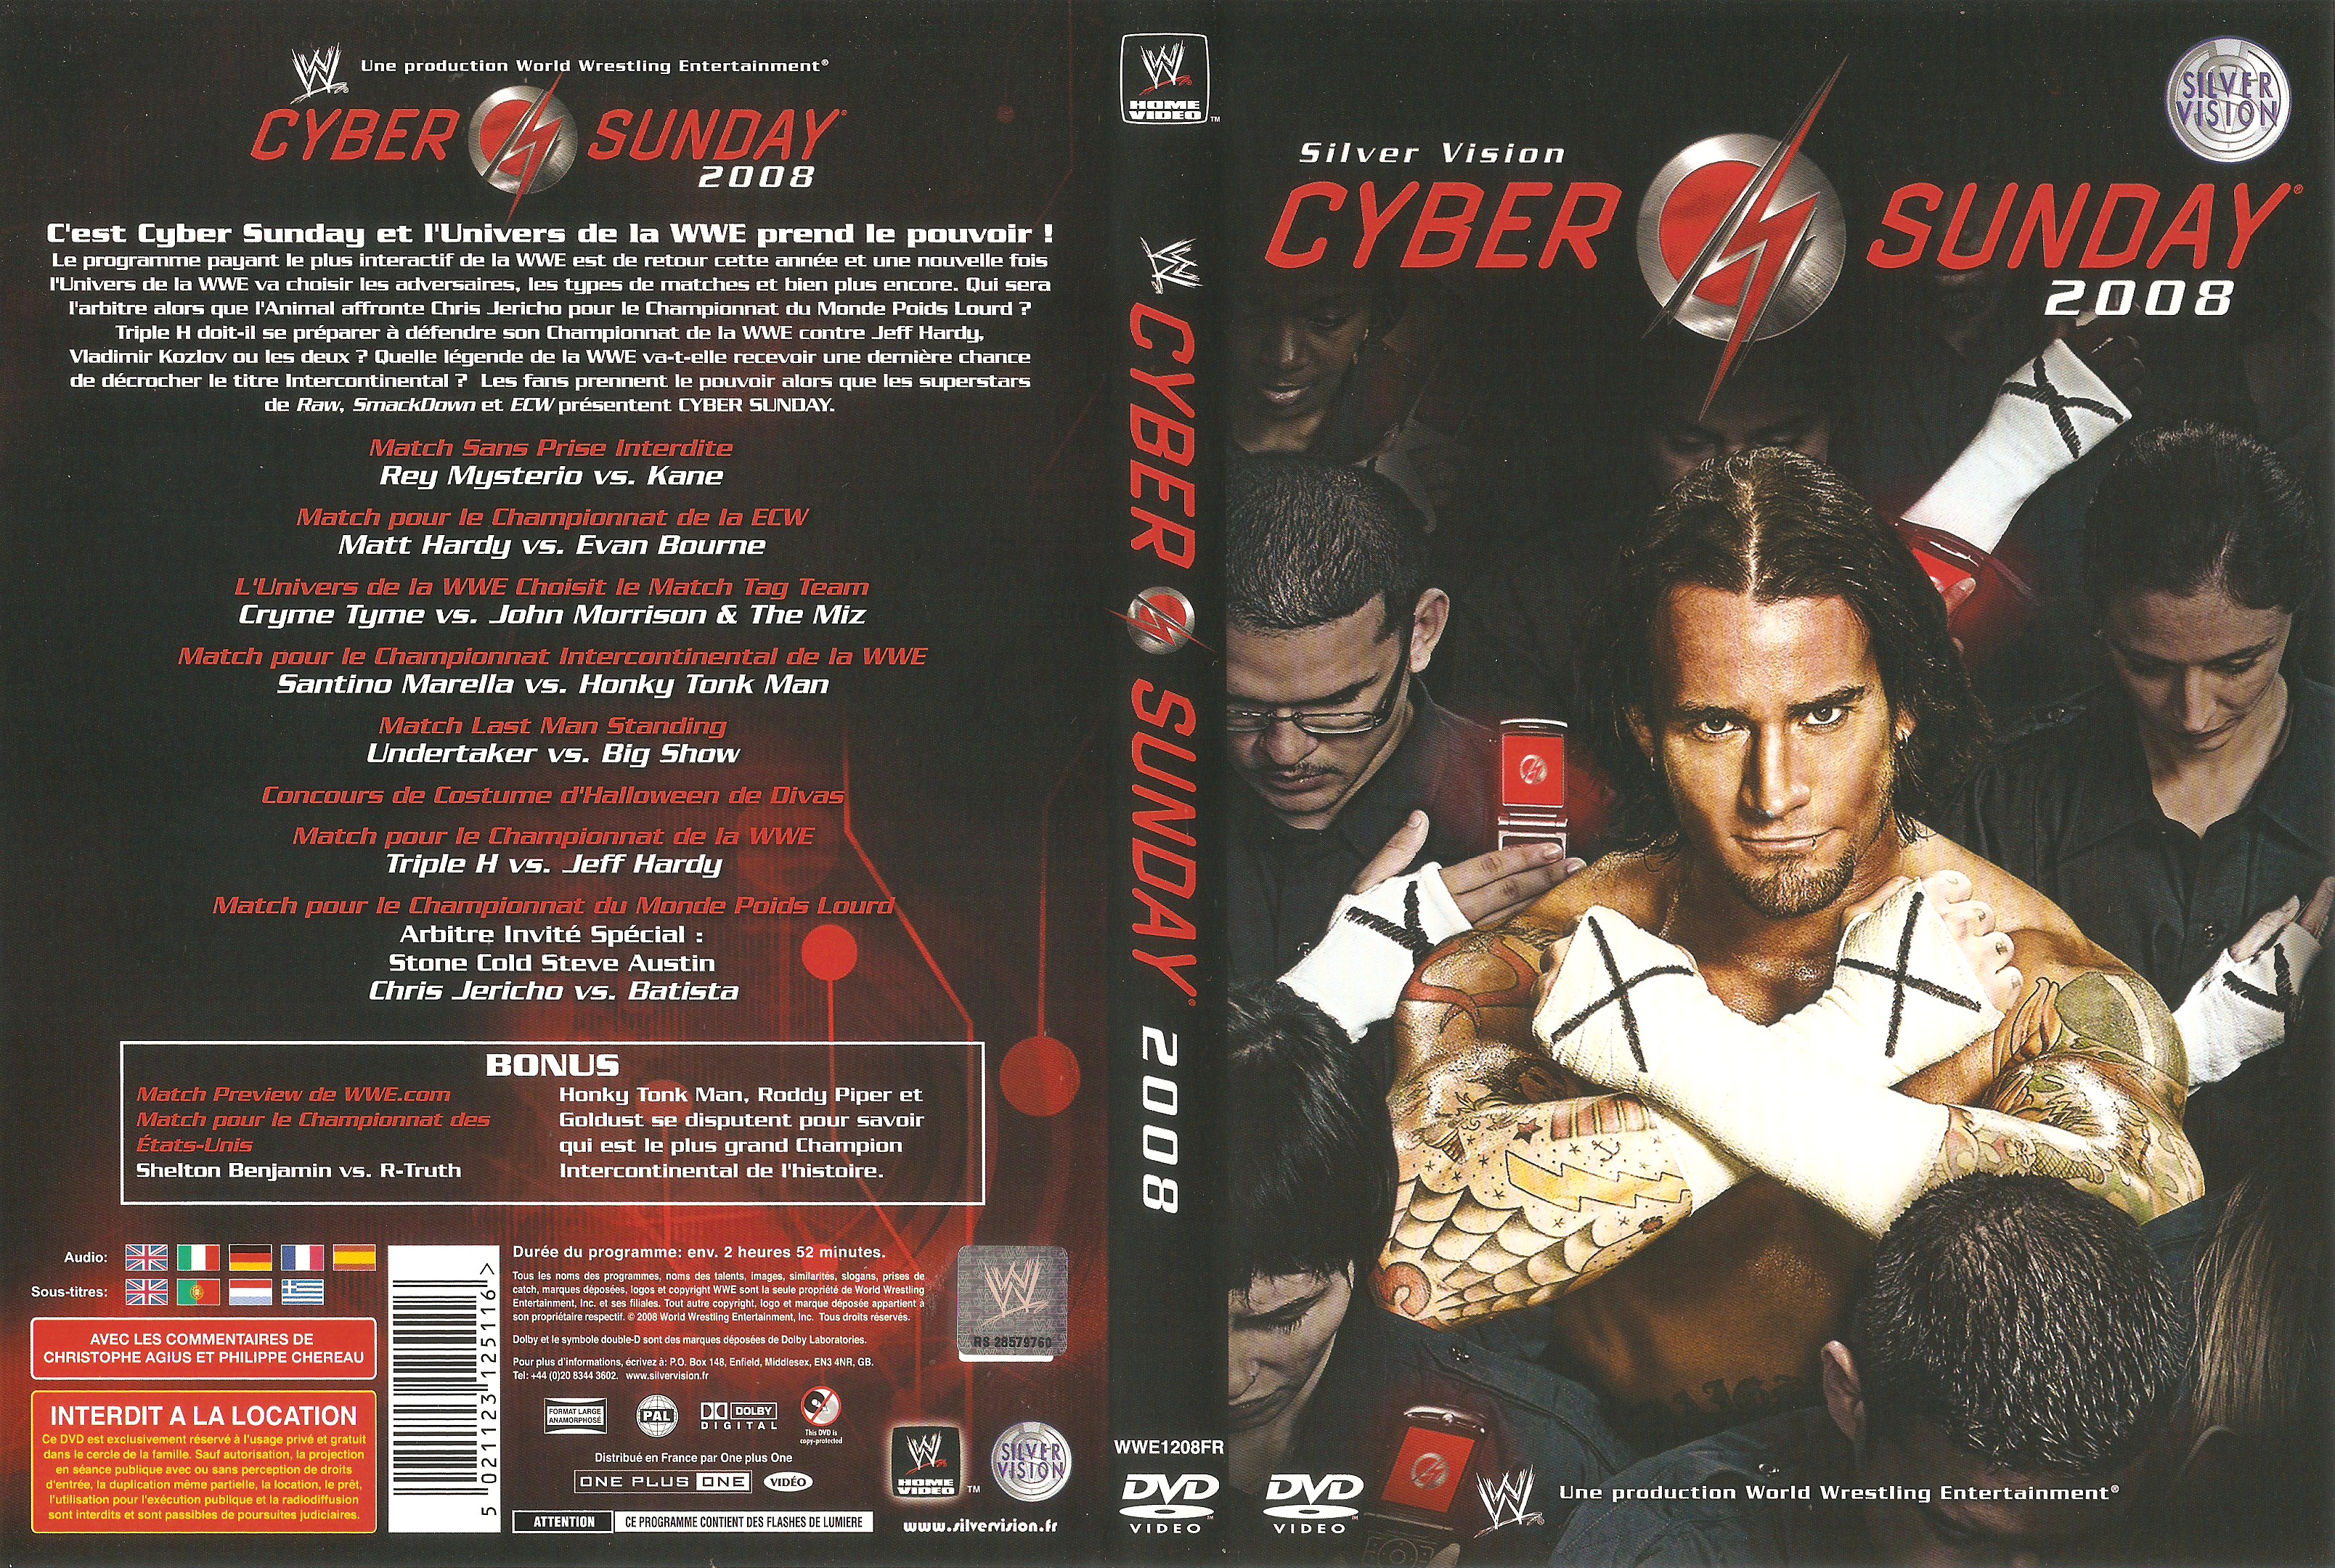 Jaquette DVD WWE Cyber Sunday 2008